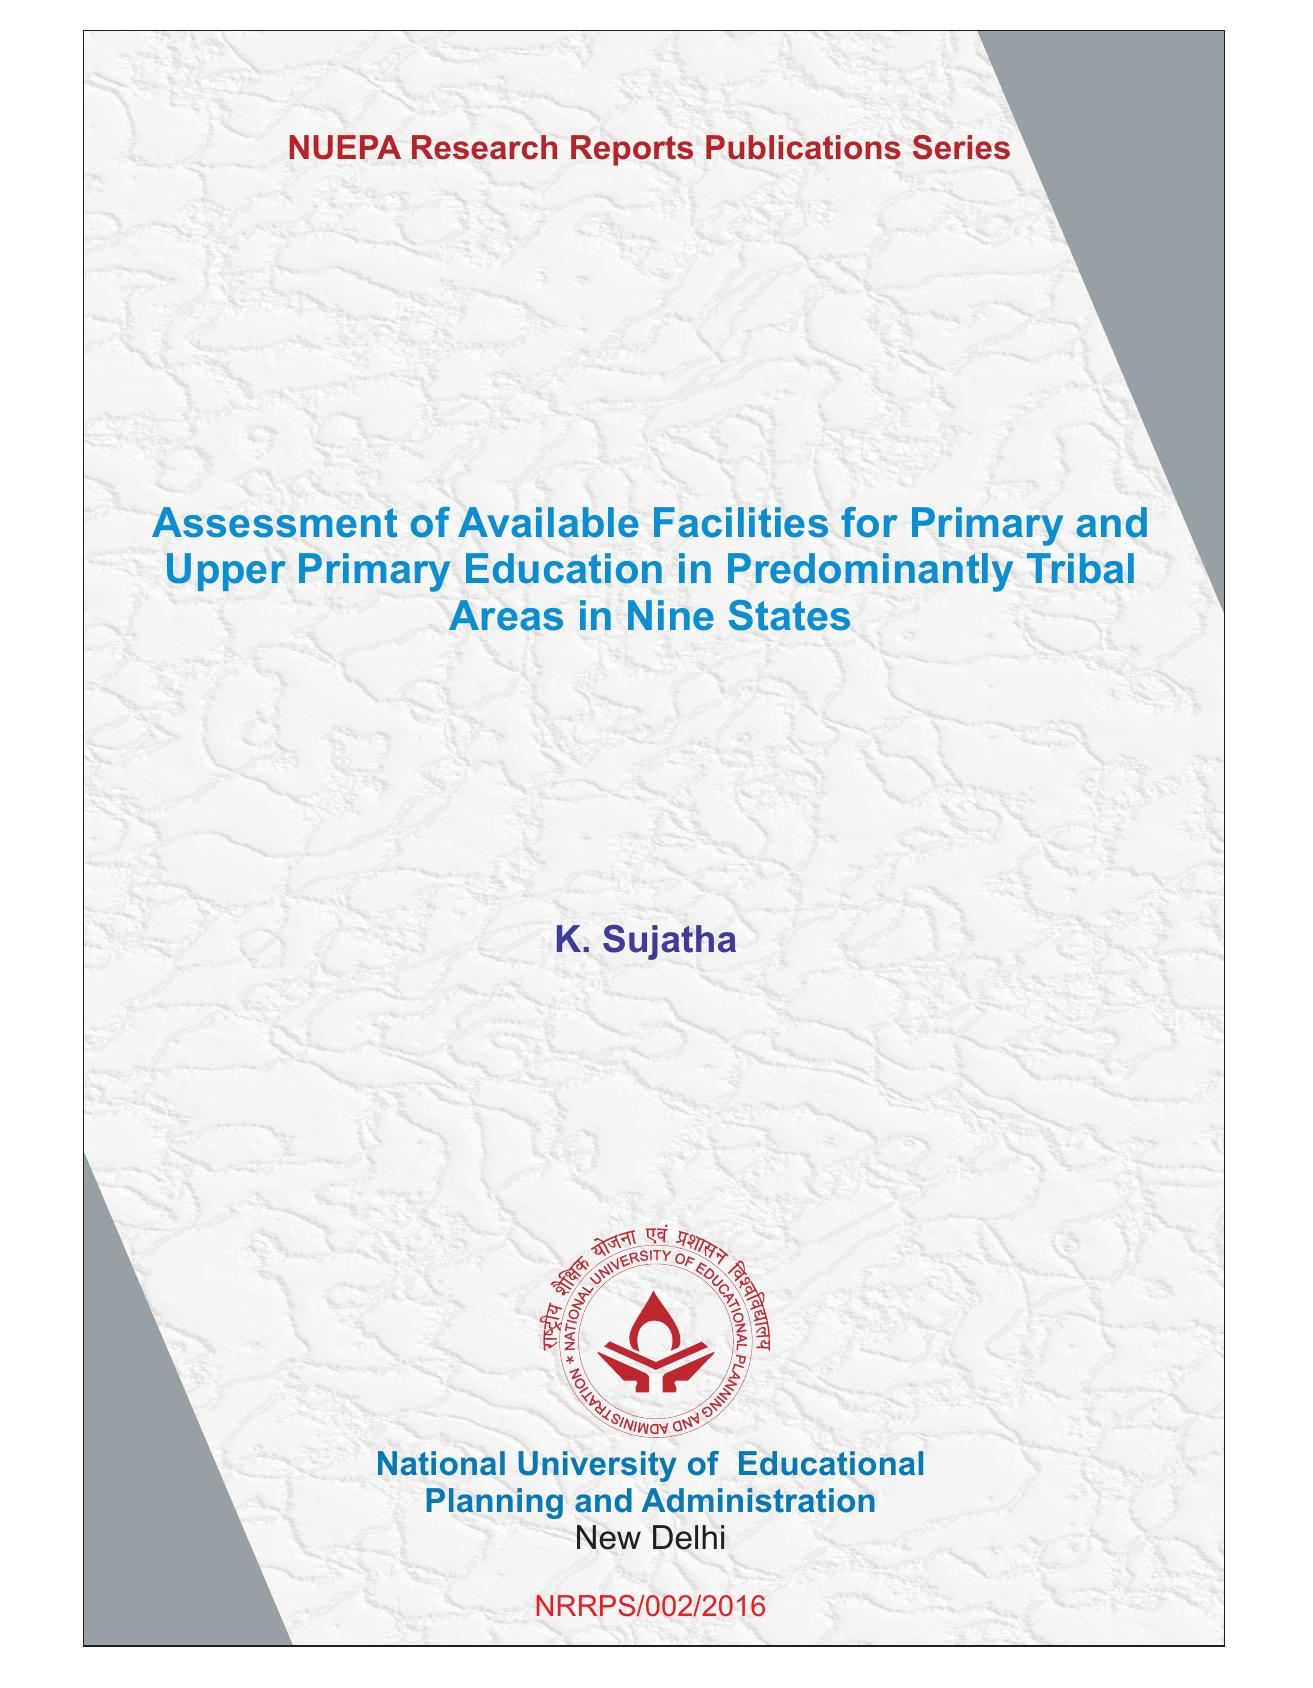 Assessment of Available Facilities for Primary and Upper Primary Education in 2016